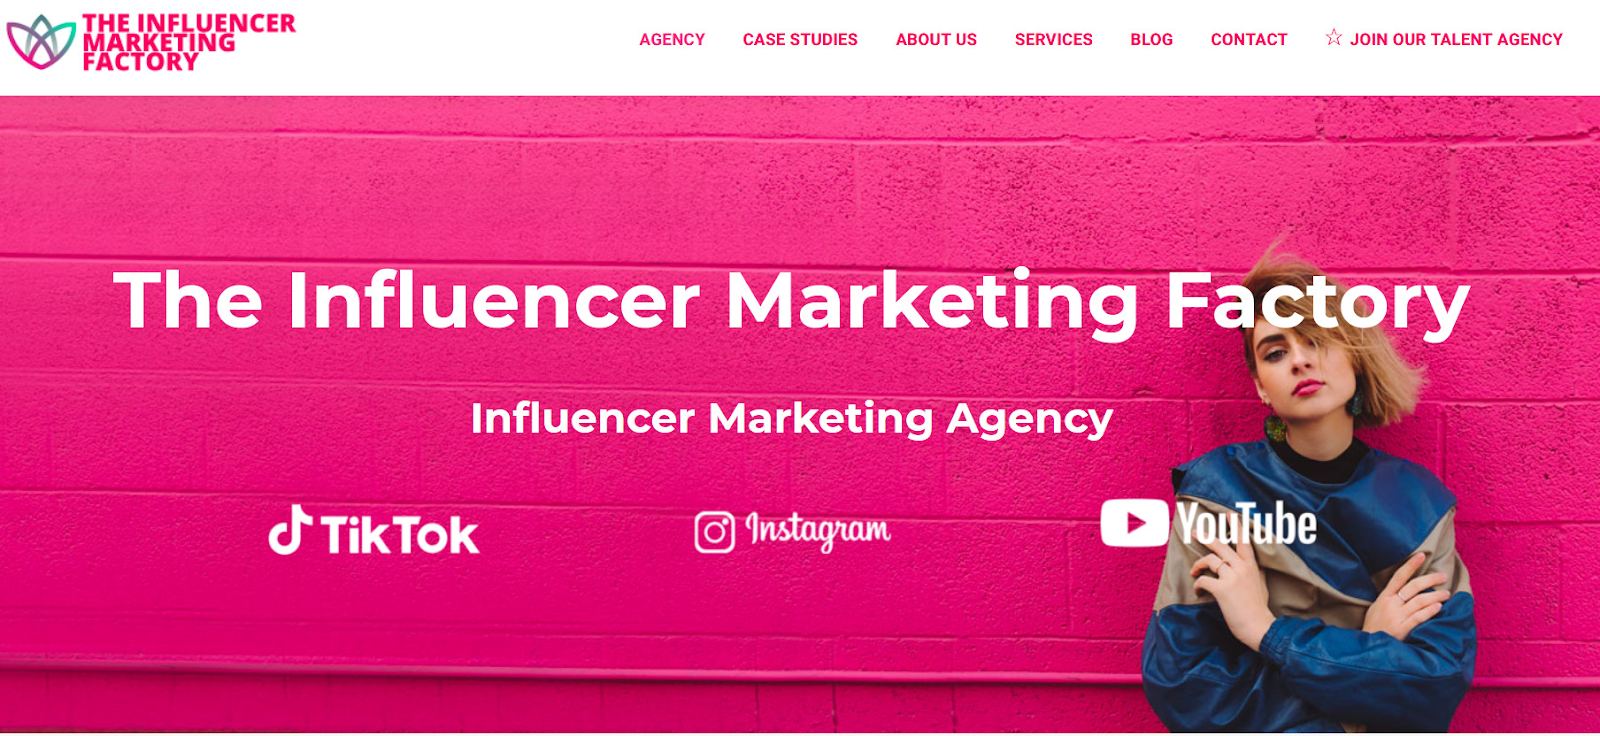 The influencer marketing factory. Top infuencer marketing agency 2021